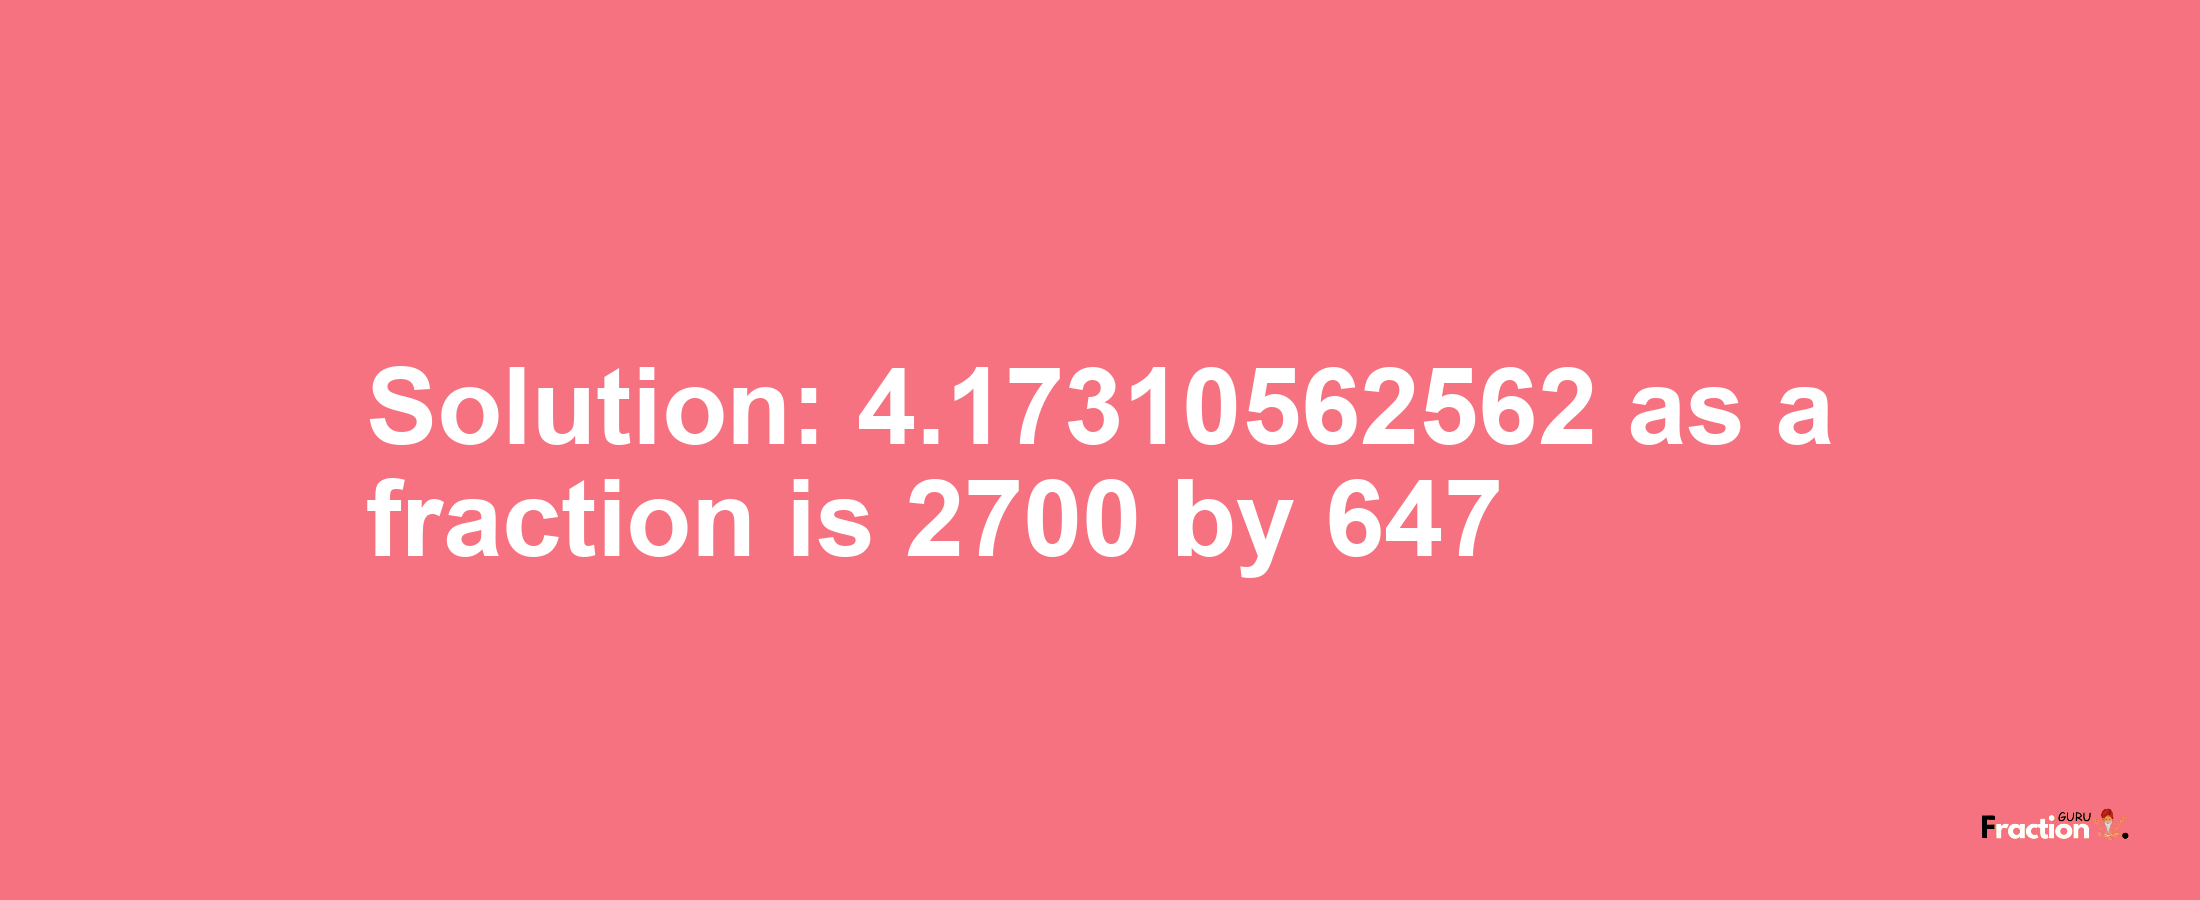 Solution:4.17310562562 as a fraction is 2700/647